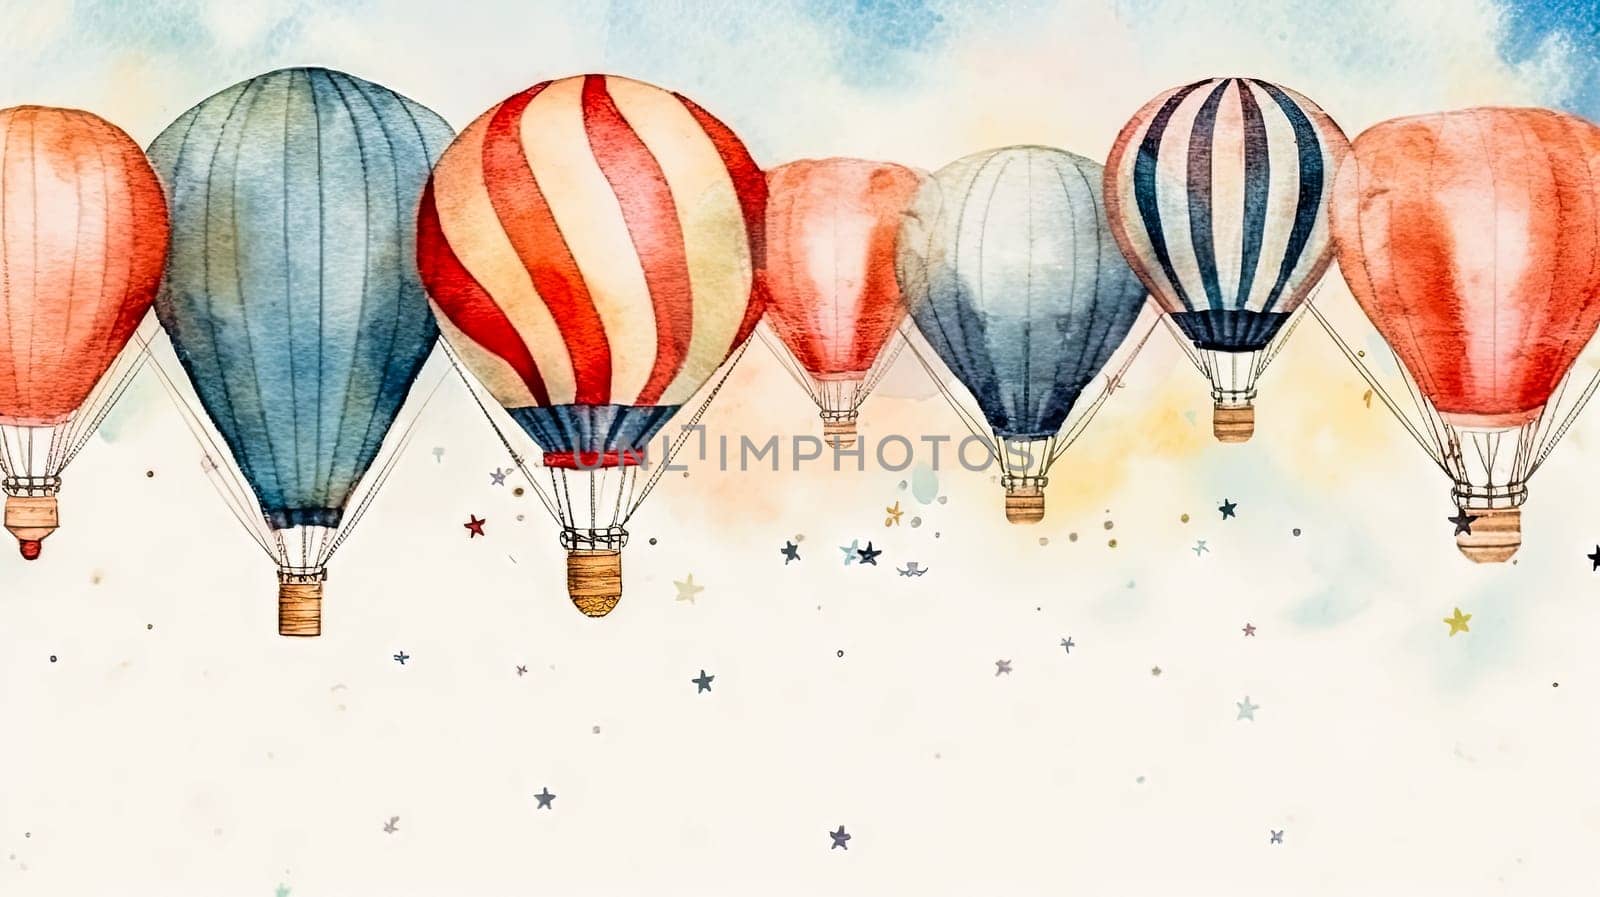 A majestic hot air balloon soars, a vibrant burst of color and freedom in the boundless, dreamy expanse